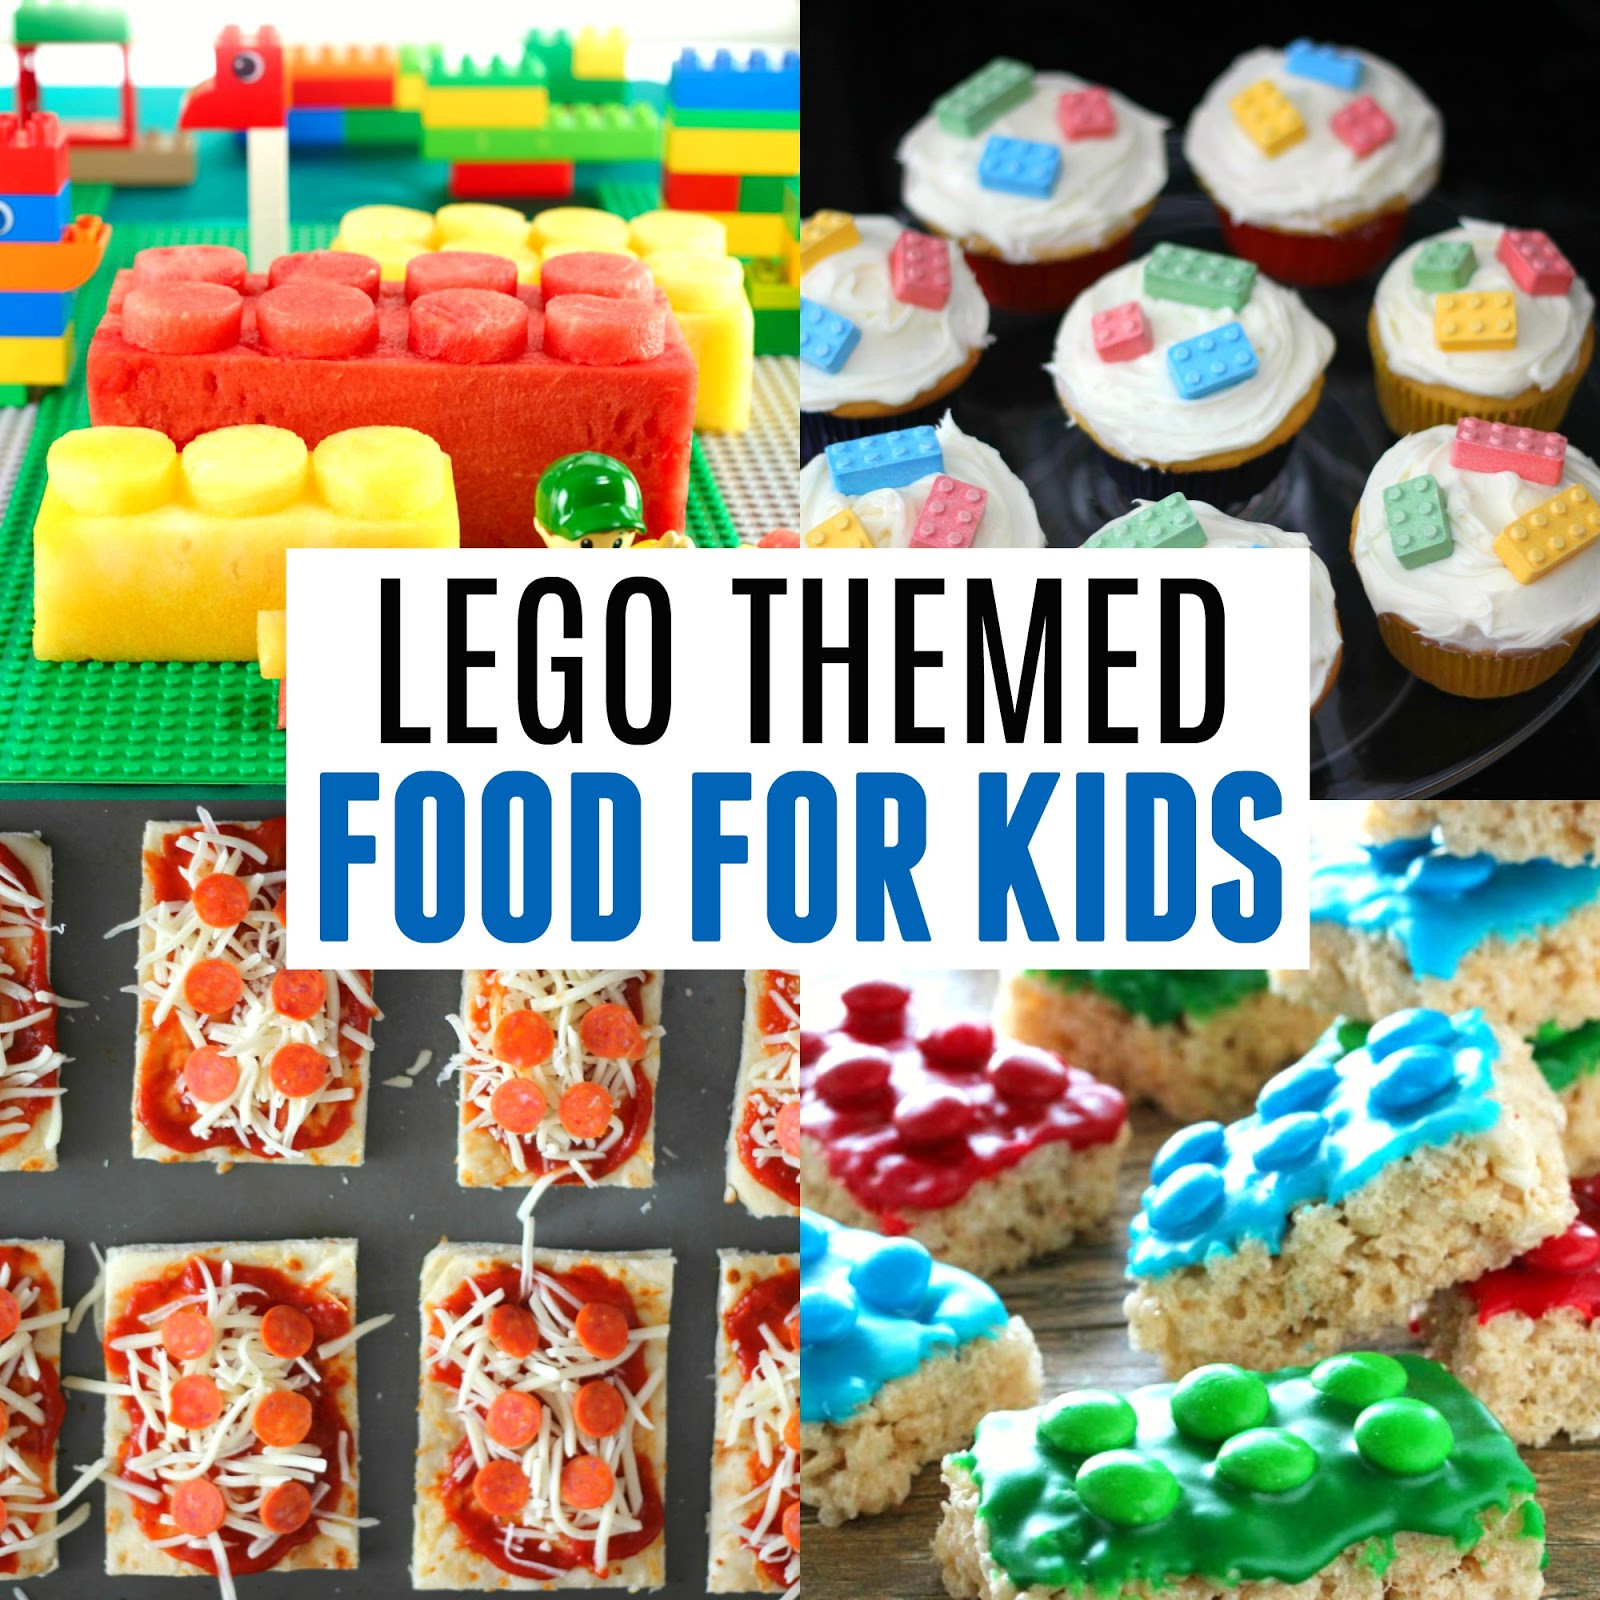 Lego Birthday Party Food Ideas
 Toddler Approved Easy LEGO Brick Themed Food for Kids